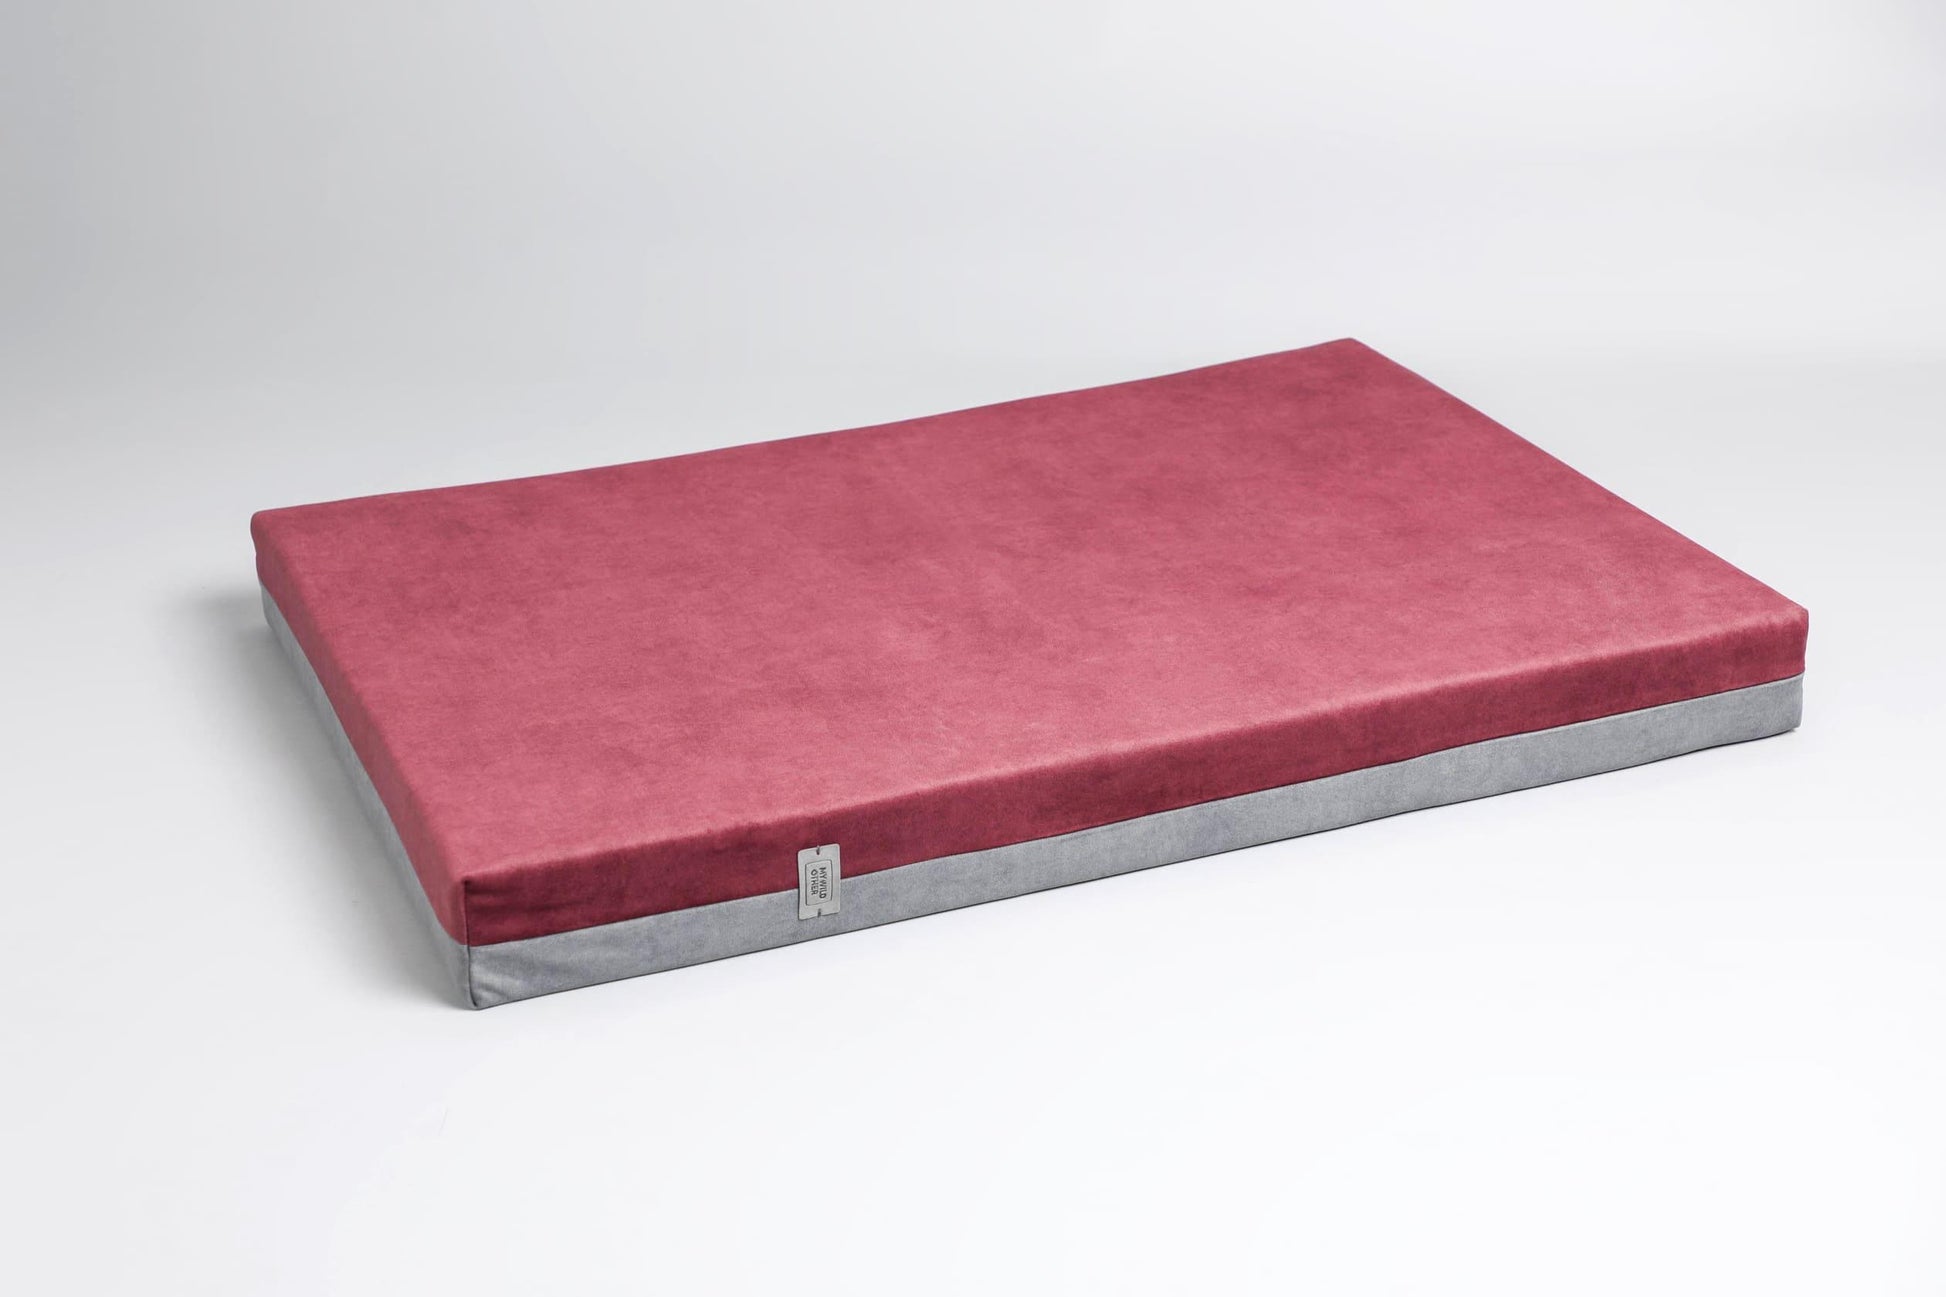 Transformer dog bed | Extra comfort & support | 2-sided | WINE RED+STEEL GREY - premium dog goods handmade in Europe by animalistus